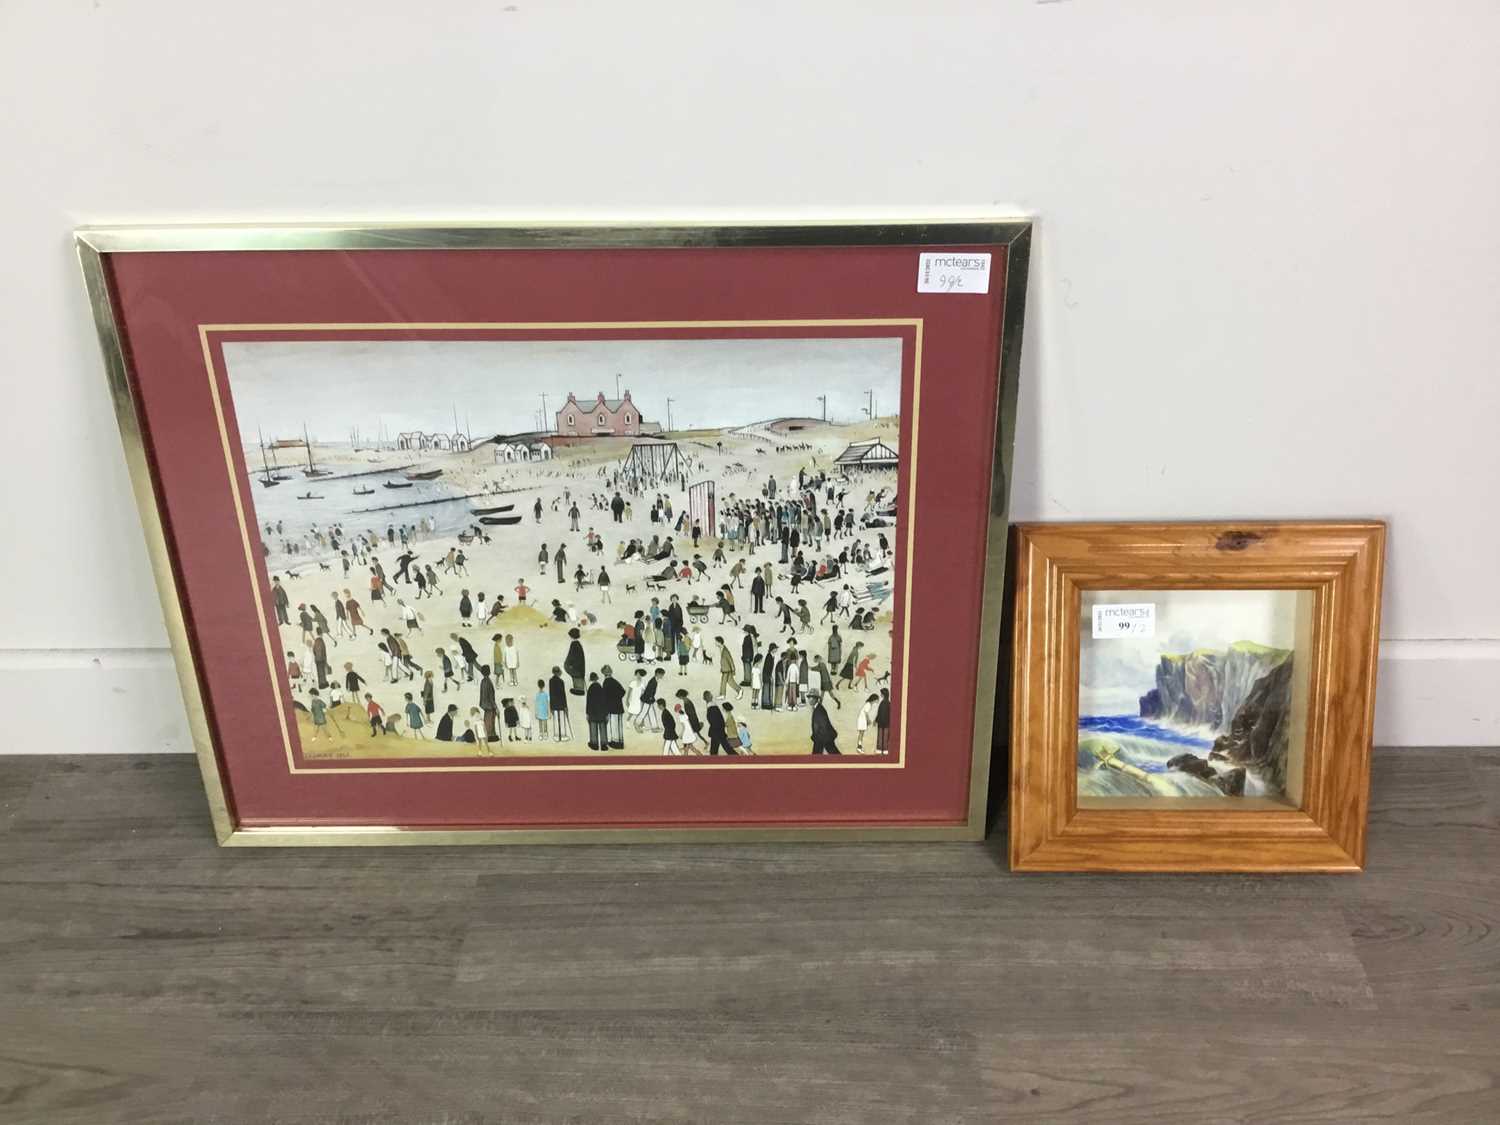 Lot 99 - A MINTON PAINTED CERAMIC TILE ALONG WITH A PRINT AFTER LOWRY